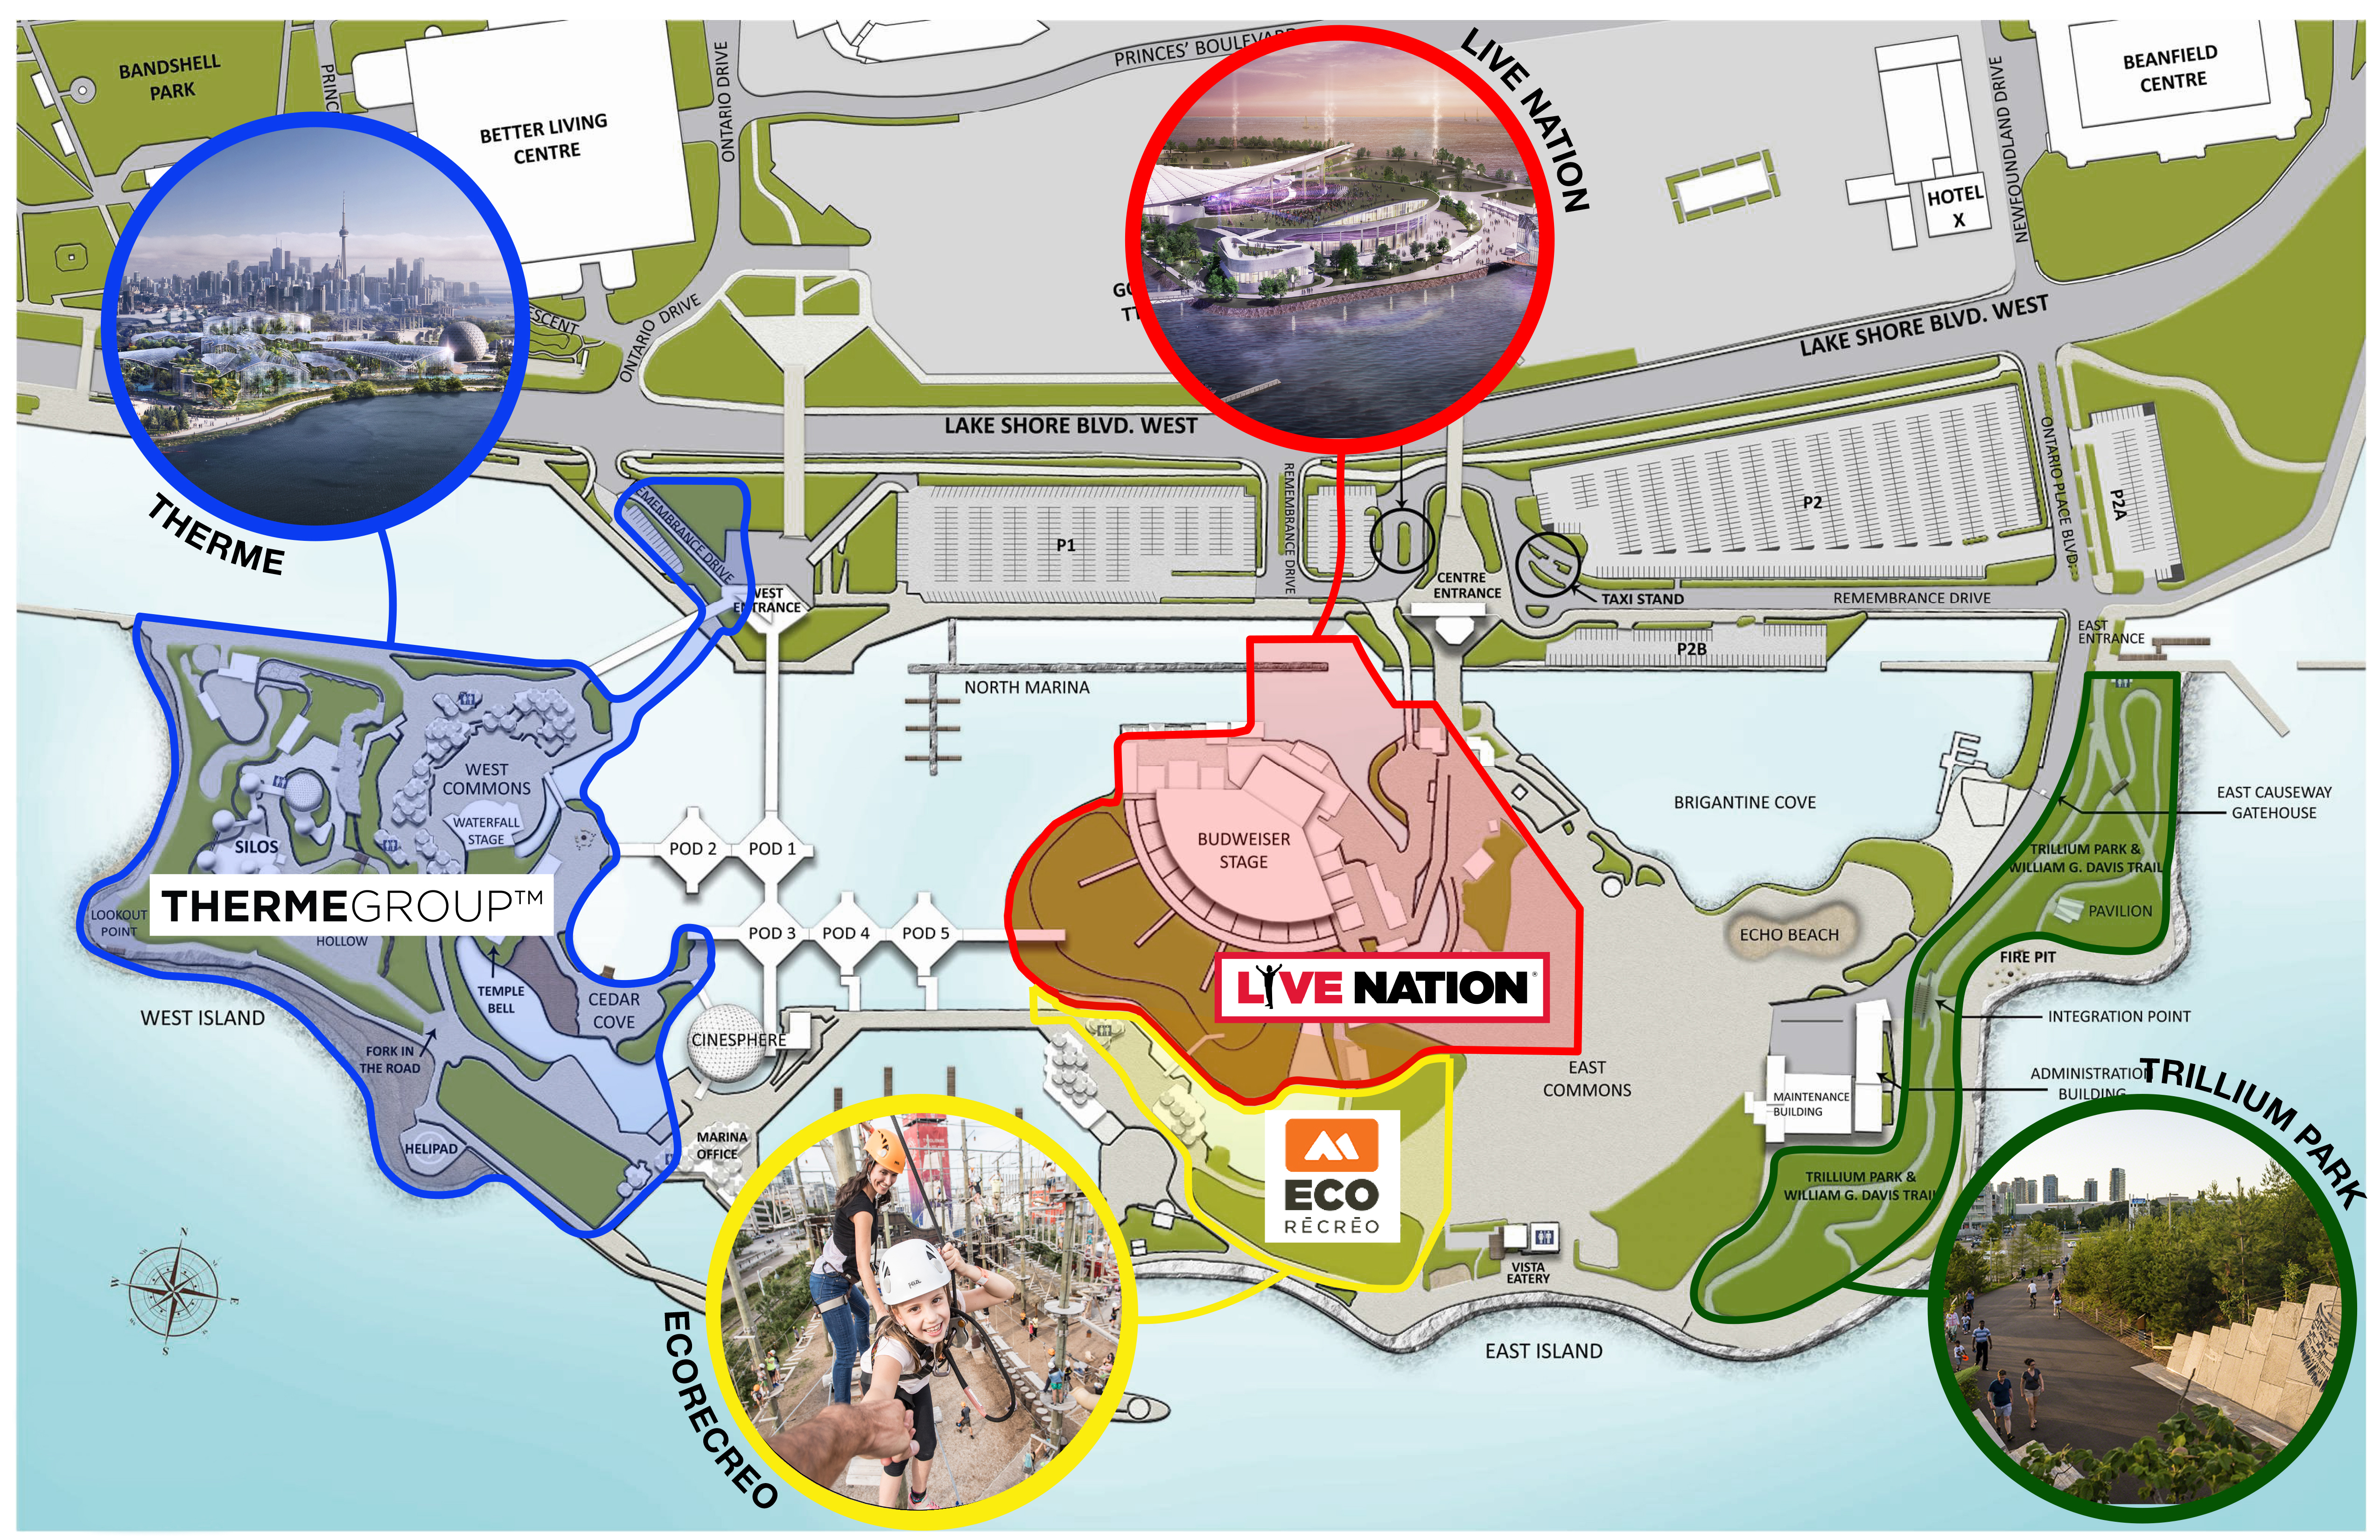 Ontario Place site map with locations of three Call for Development participant attraction sites, as well as Trillium Park, outlined.